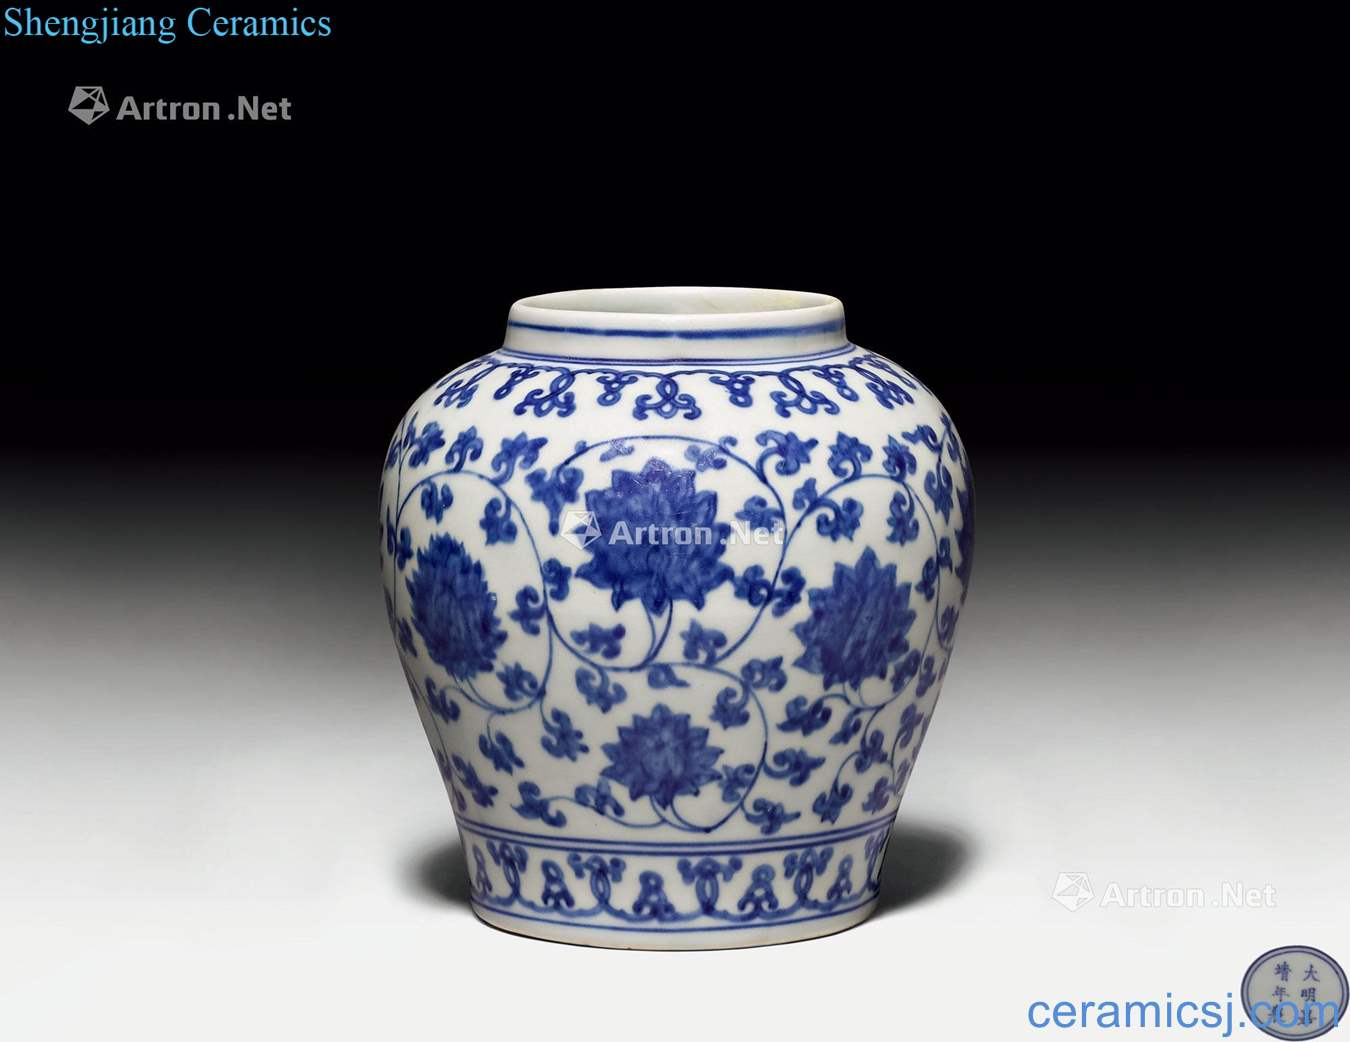 Jiajing six character mark the and of the period. A BLUE and WHITE TAPERING JAR WITH PEONY DECO - RATION.